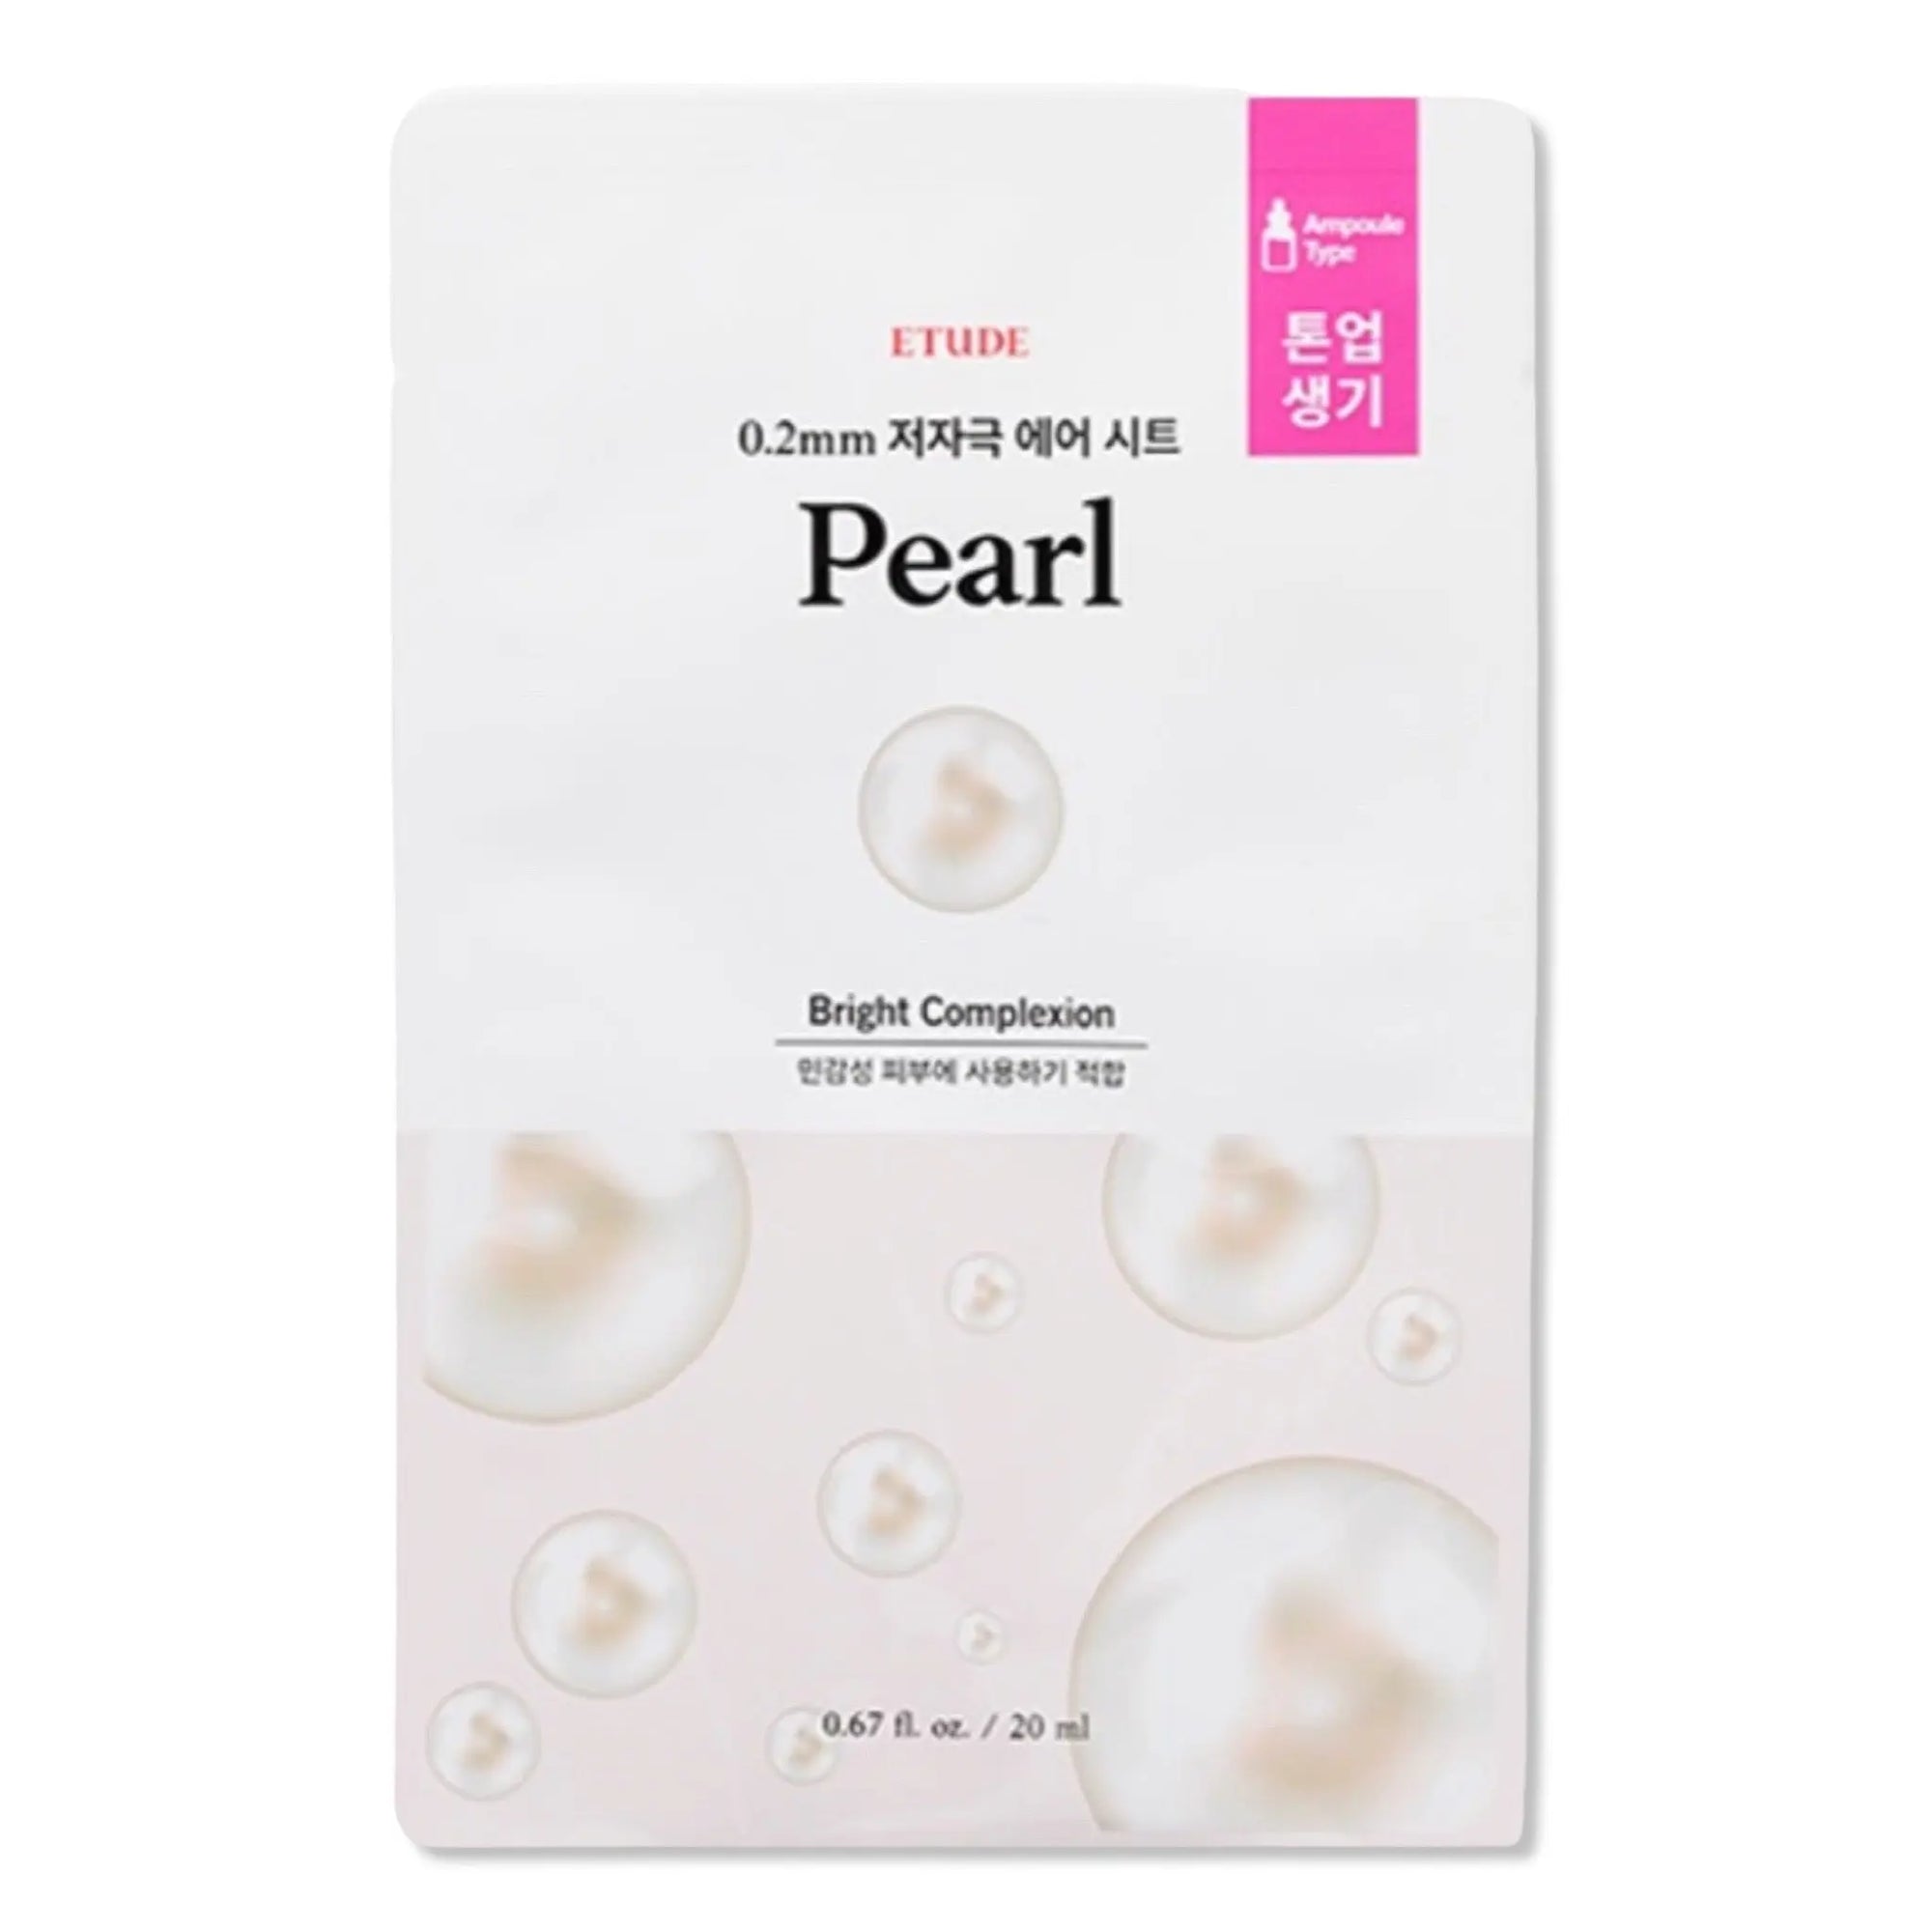 Etude House - Therapy Air Mask Etude House